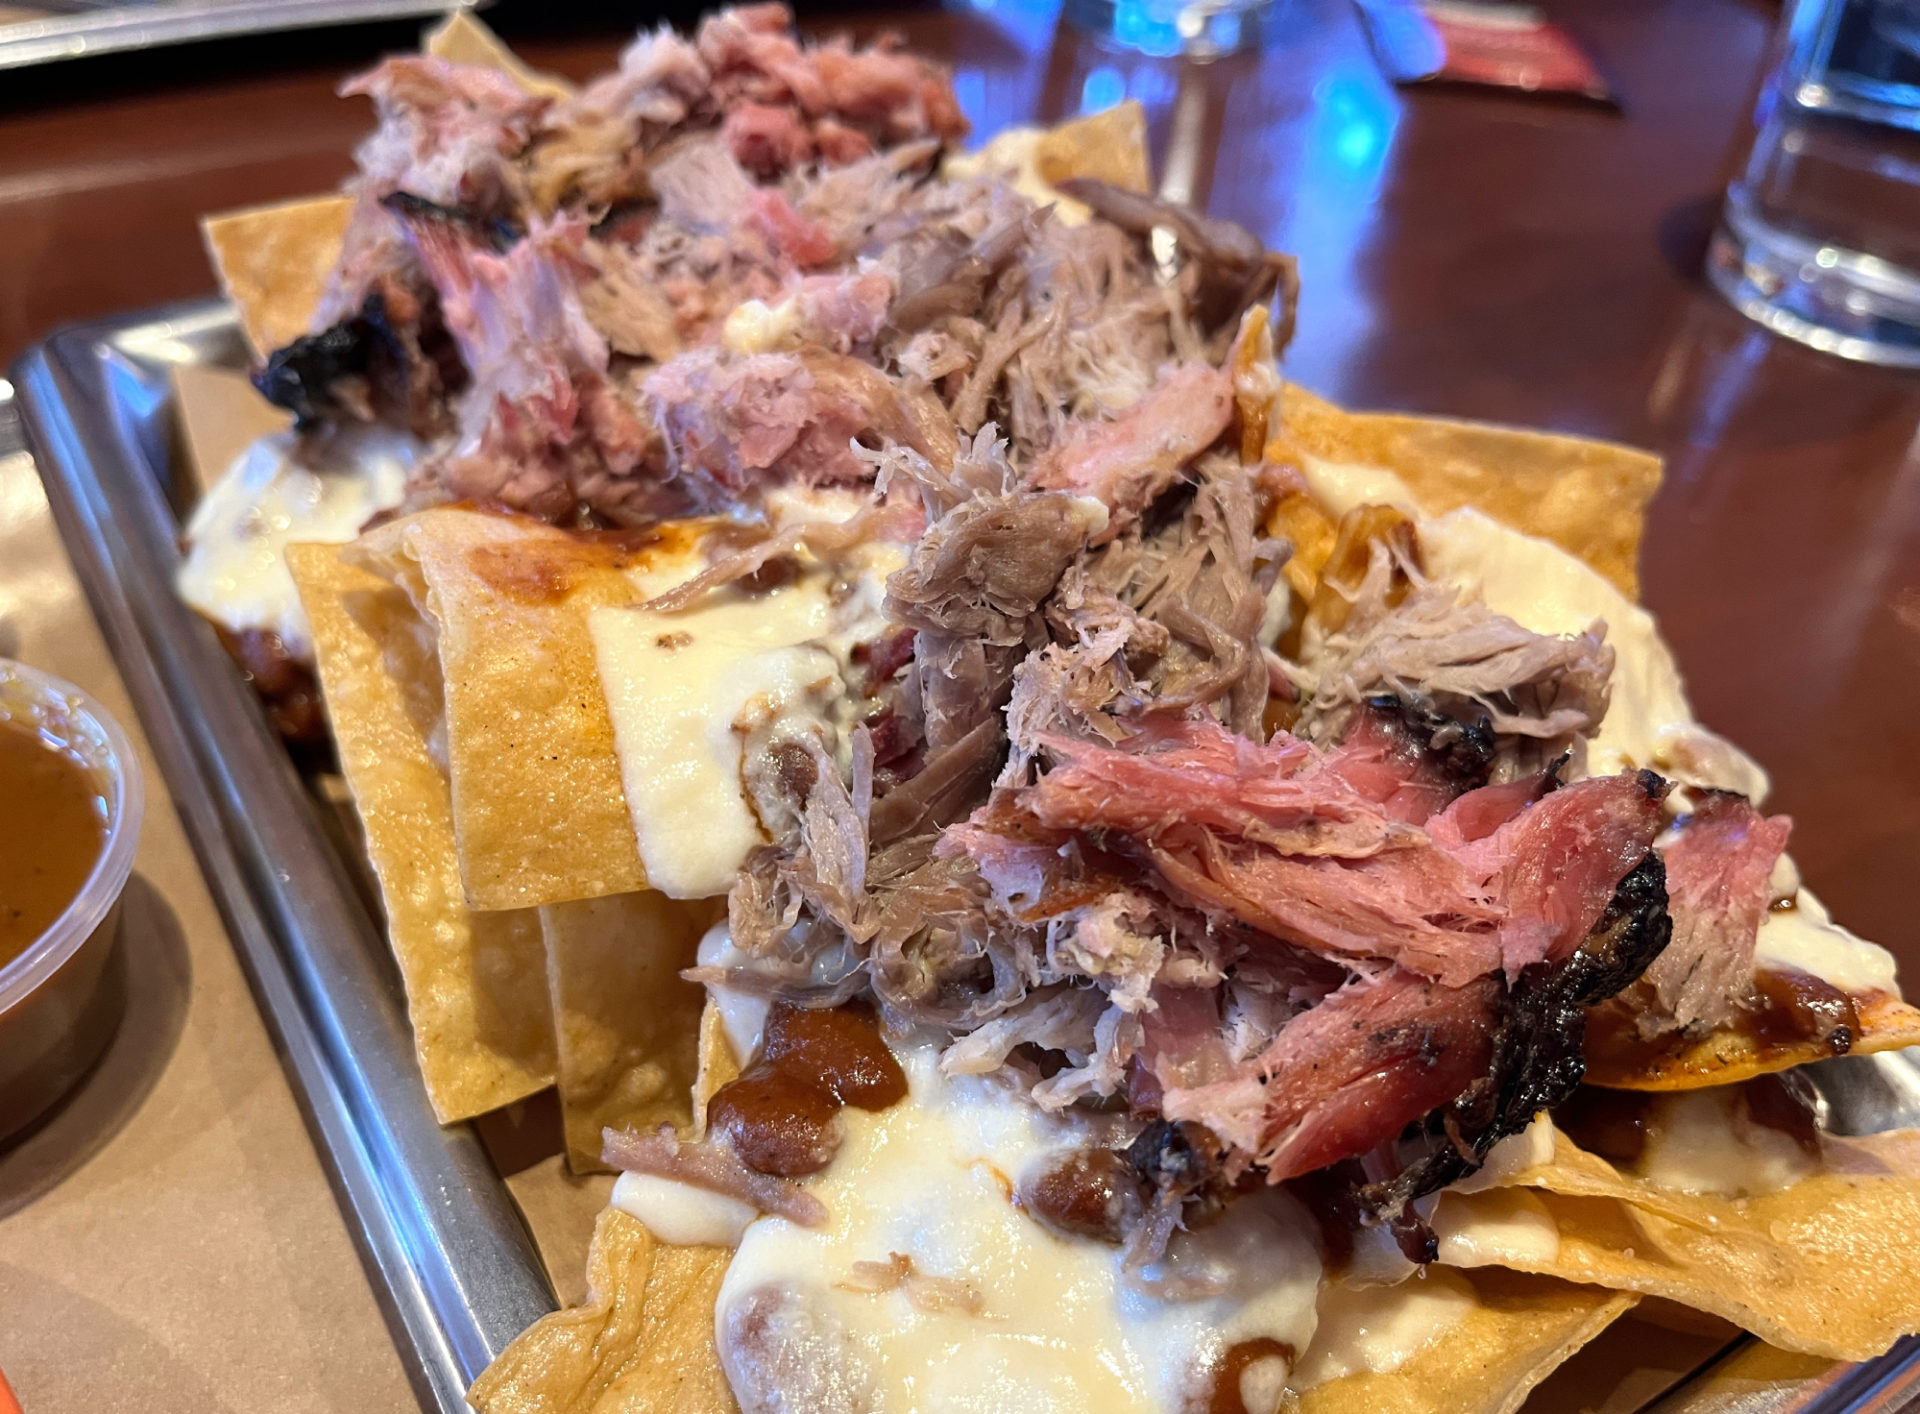 A plate of pulled pork nachos at Black Dog. Golden chips are piled with white cheese and pulled pork on a rectangular silver tray.